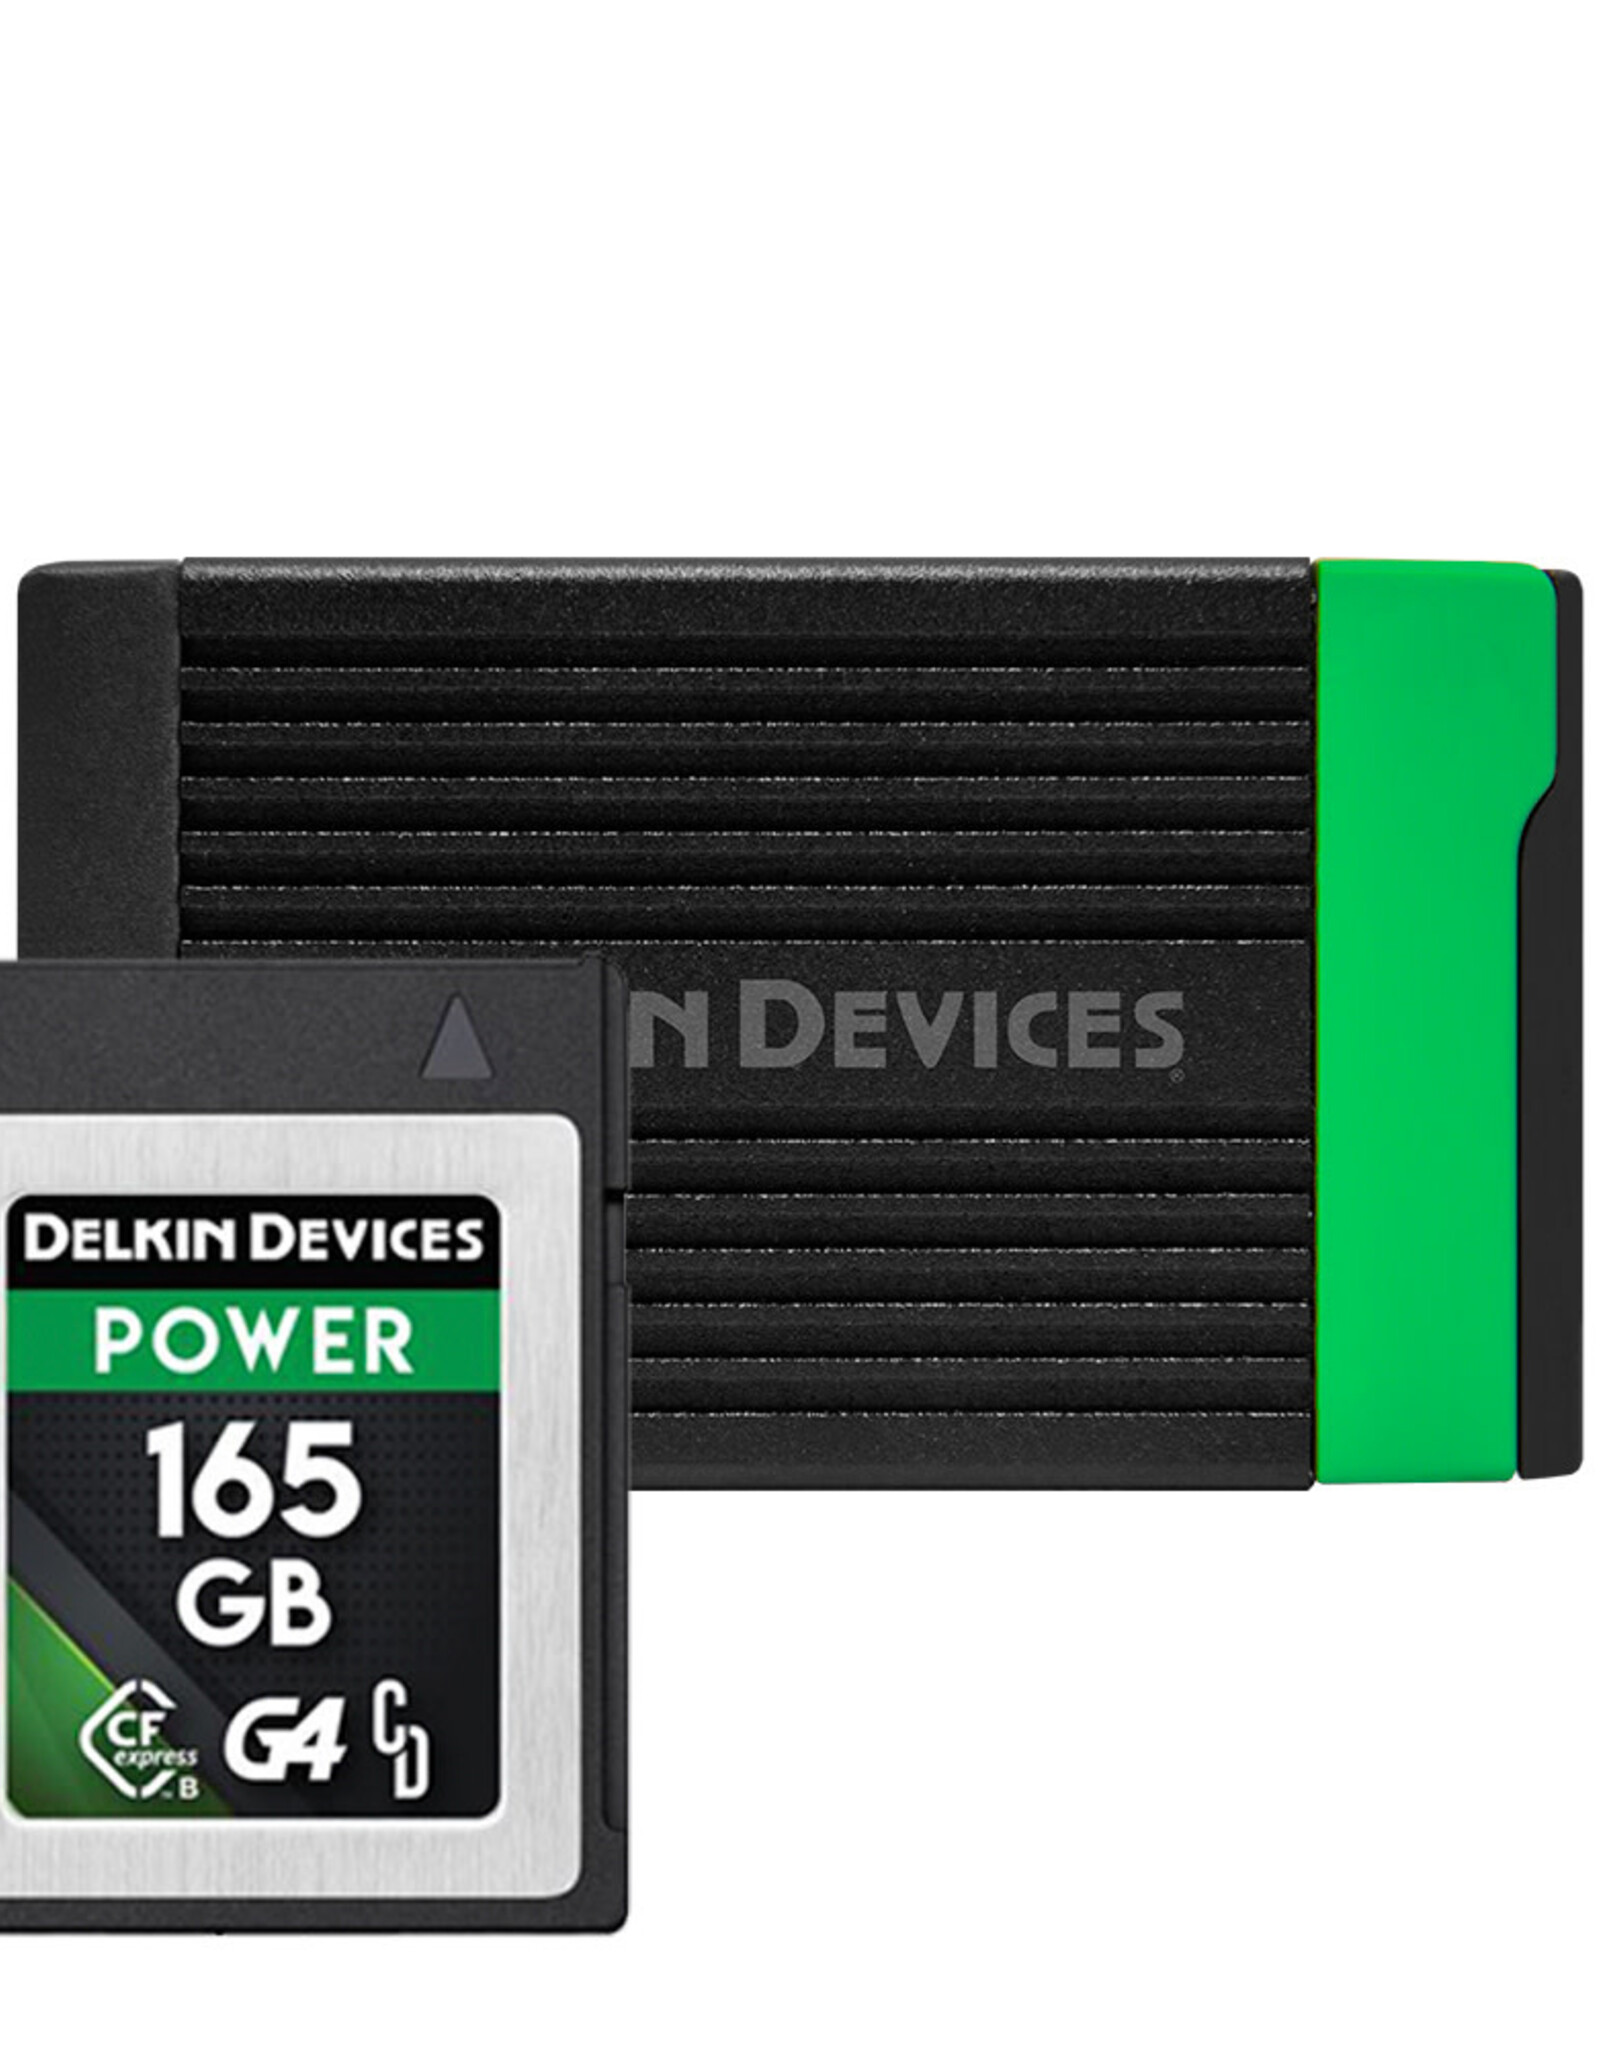 Delkin Devices Delkin Devices CFExpress Memory Card Reader USB 3.2 & CFExpress Type B 165gb Bundle